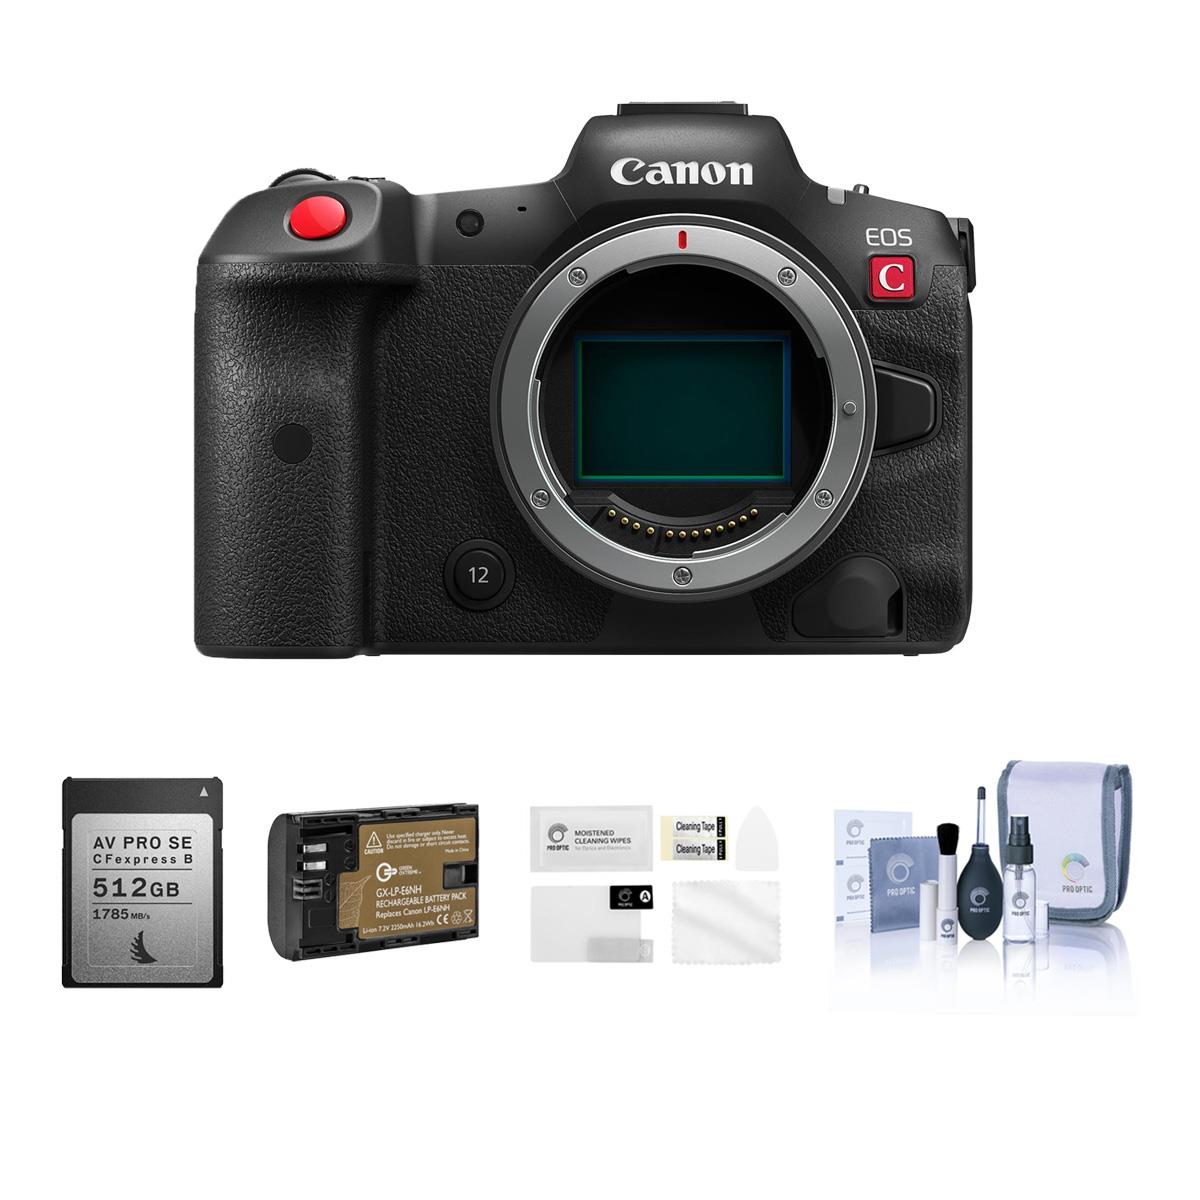 Image of Canon EOS R5 C Mirrorless Digital Cinema Camera Body with 512GB Cfexpress Card